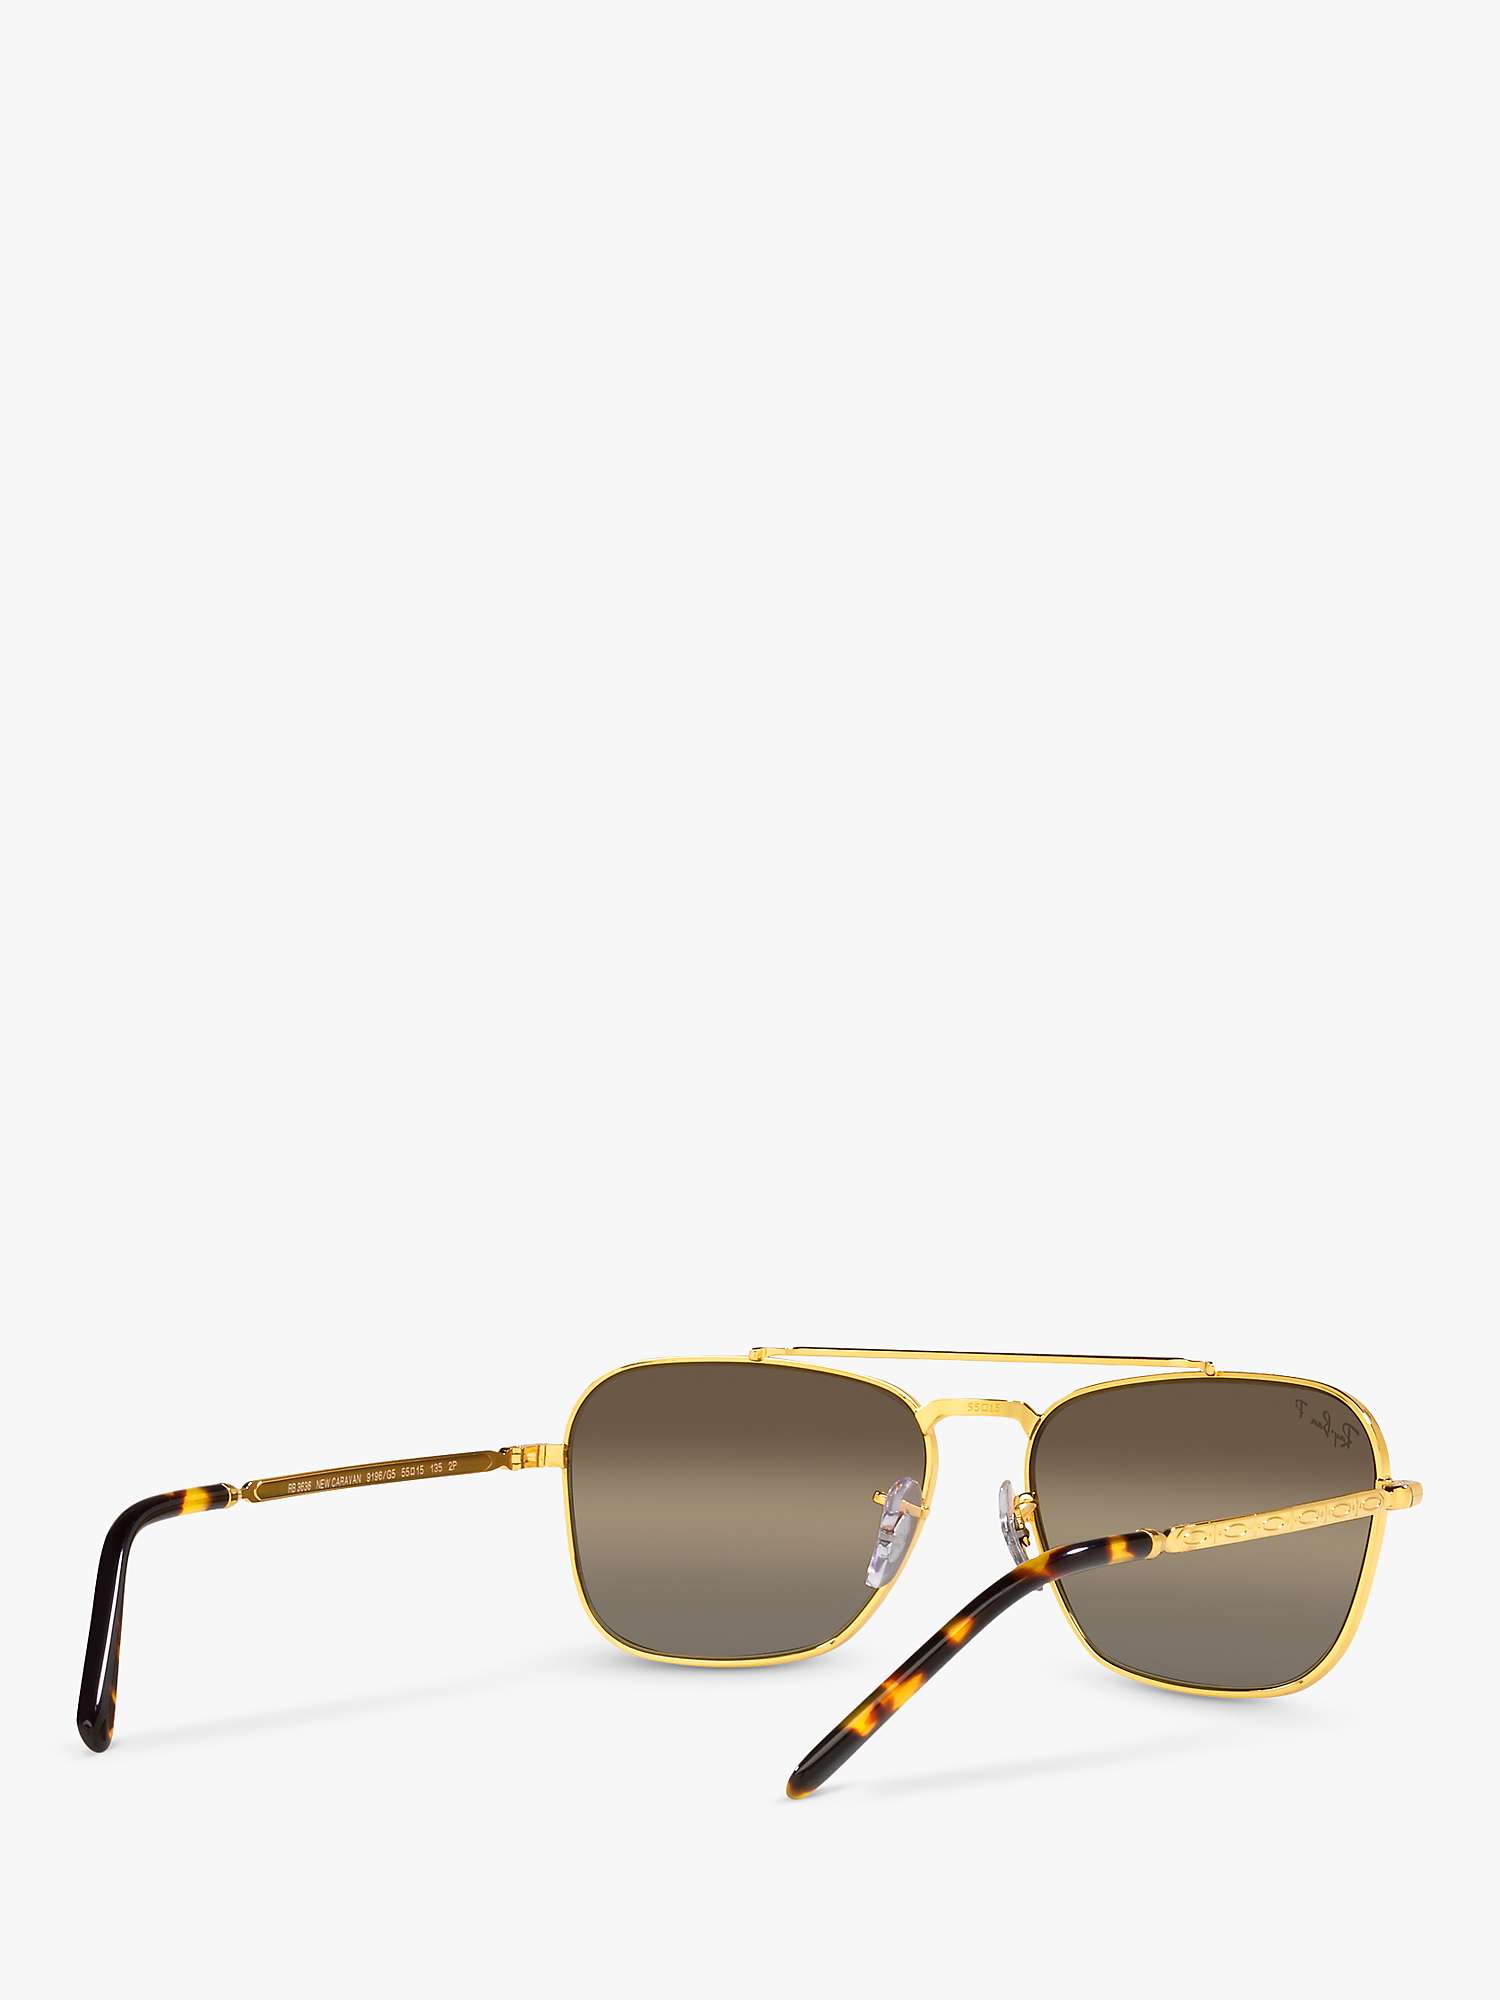 Buy Ray-Ban RB3636 Unisex New Caravan Square Sunglasses, Legend Gold/Brown Online at johnlewis.com